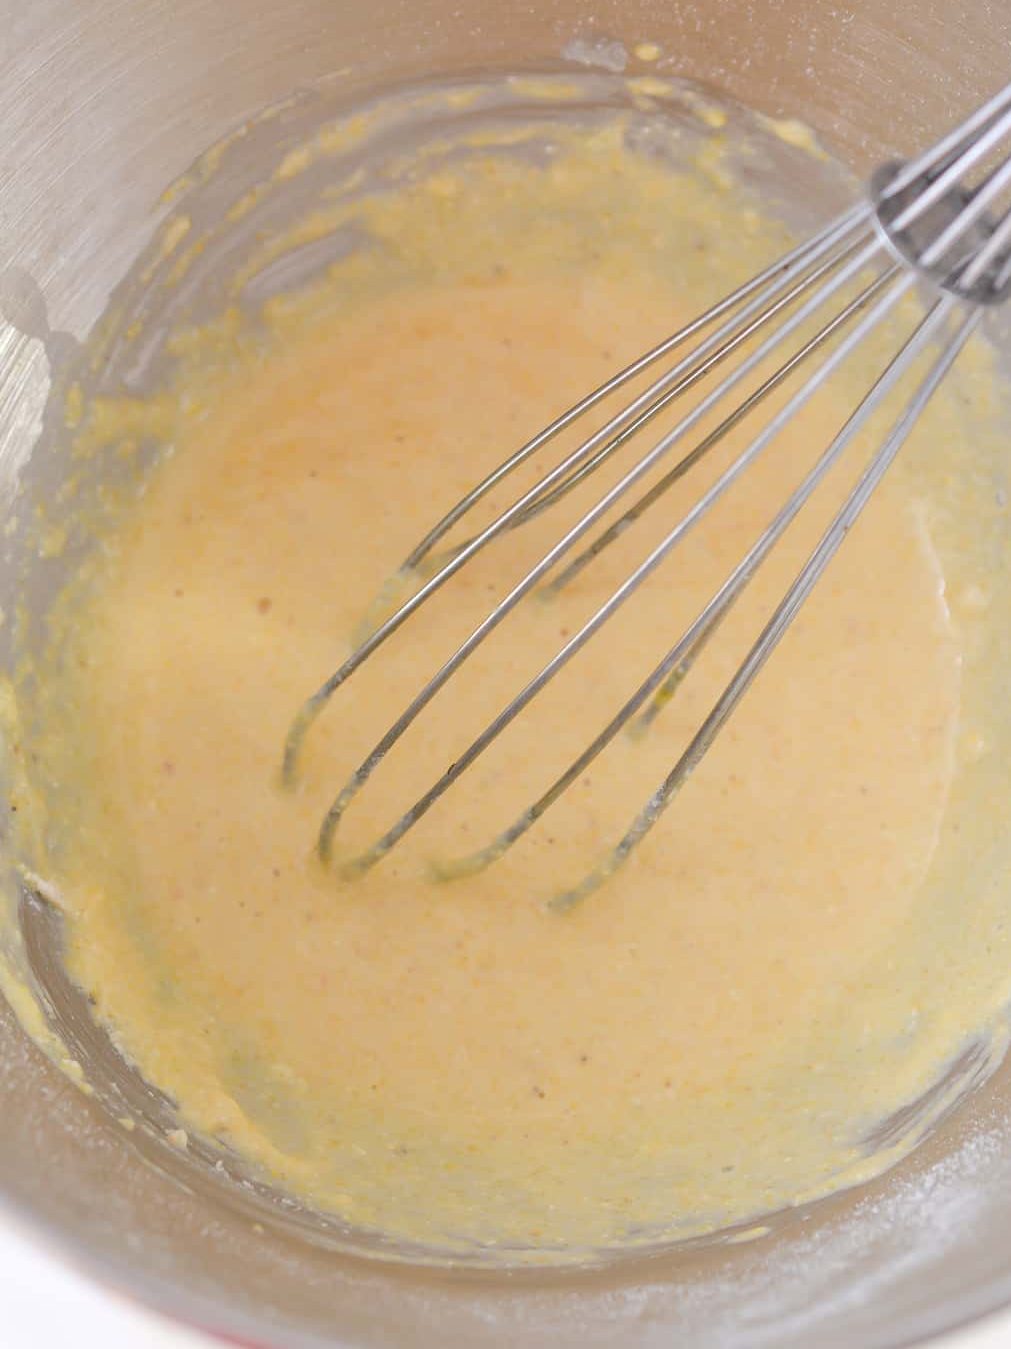 Whisk the ingredients together to combine well.